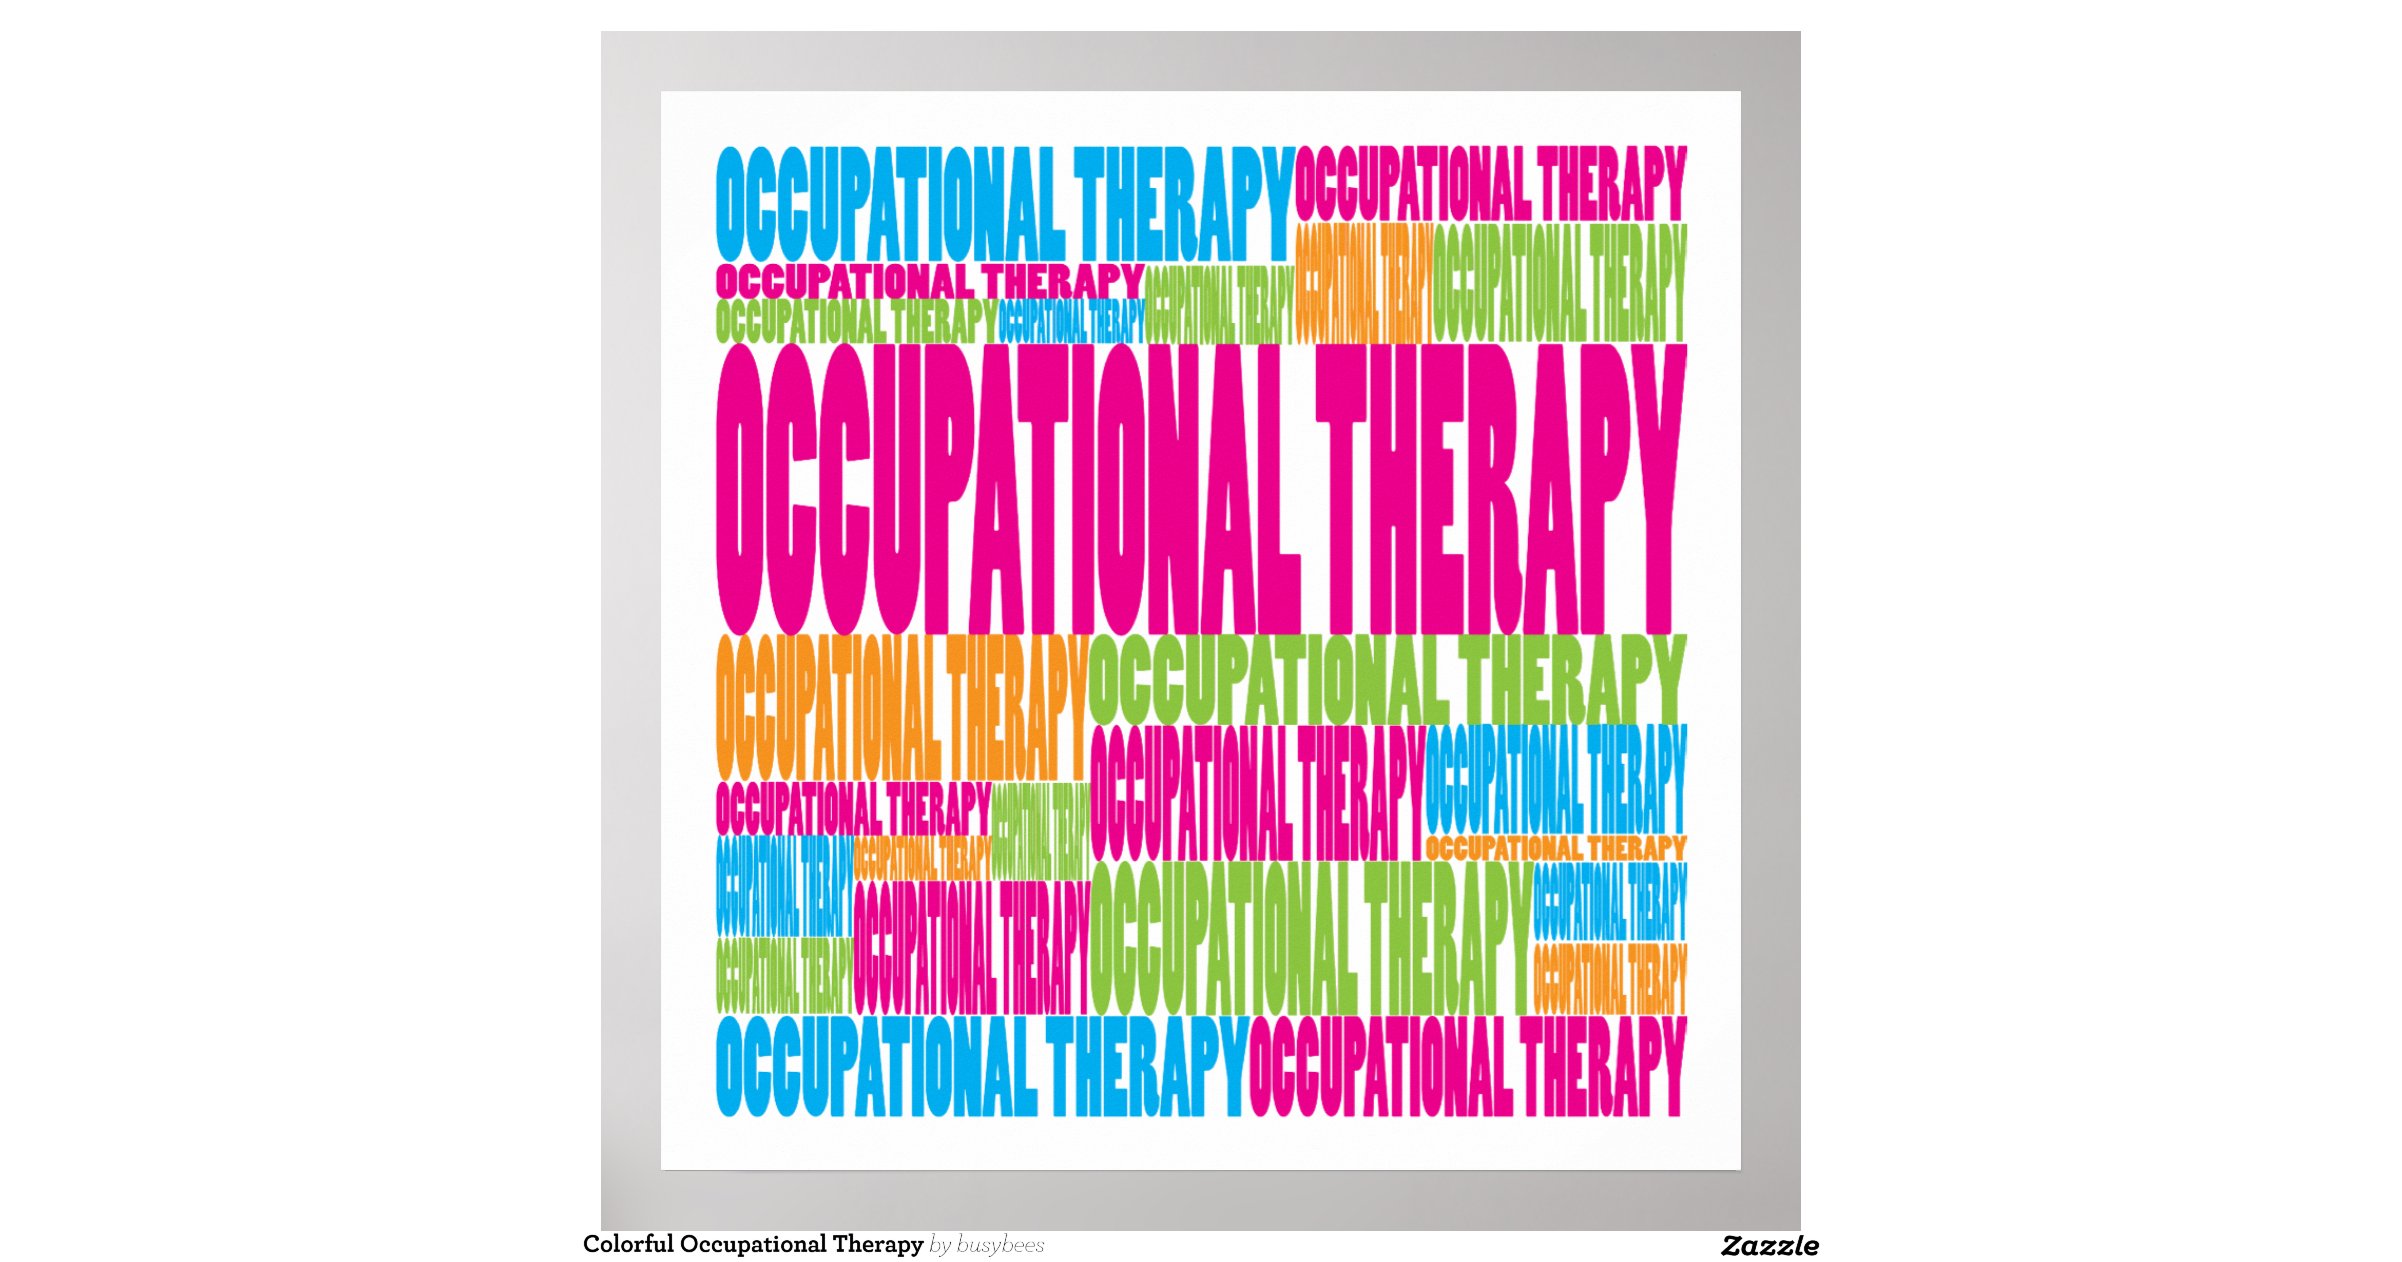 colorful-occupational-therapy-poster-r61d970df7e8b499a95166f304cbfb182